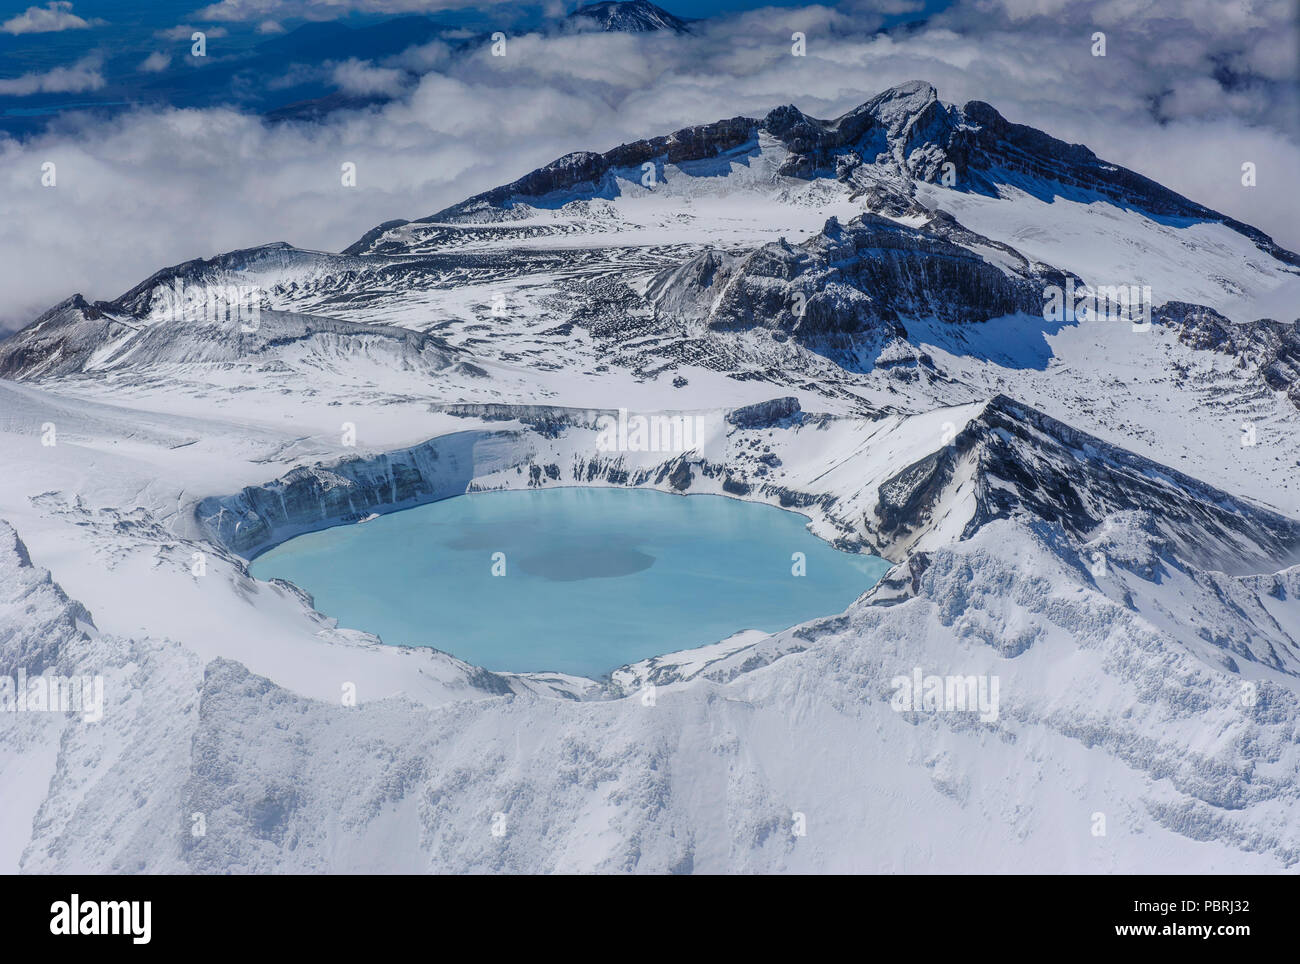 Aerial view of a tuquoise crater lake on top of Mount Ruapehu, Tongariro National Park, North Island, New Zealand Stock Photo